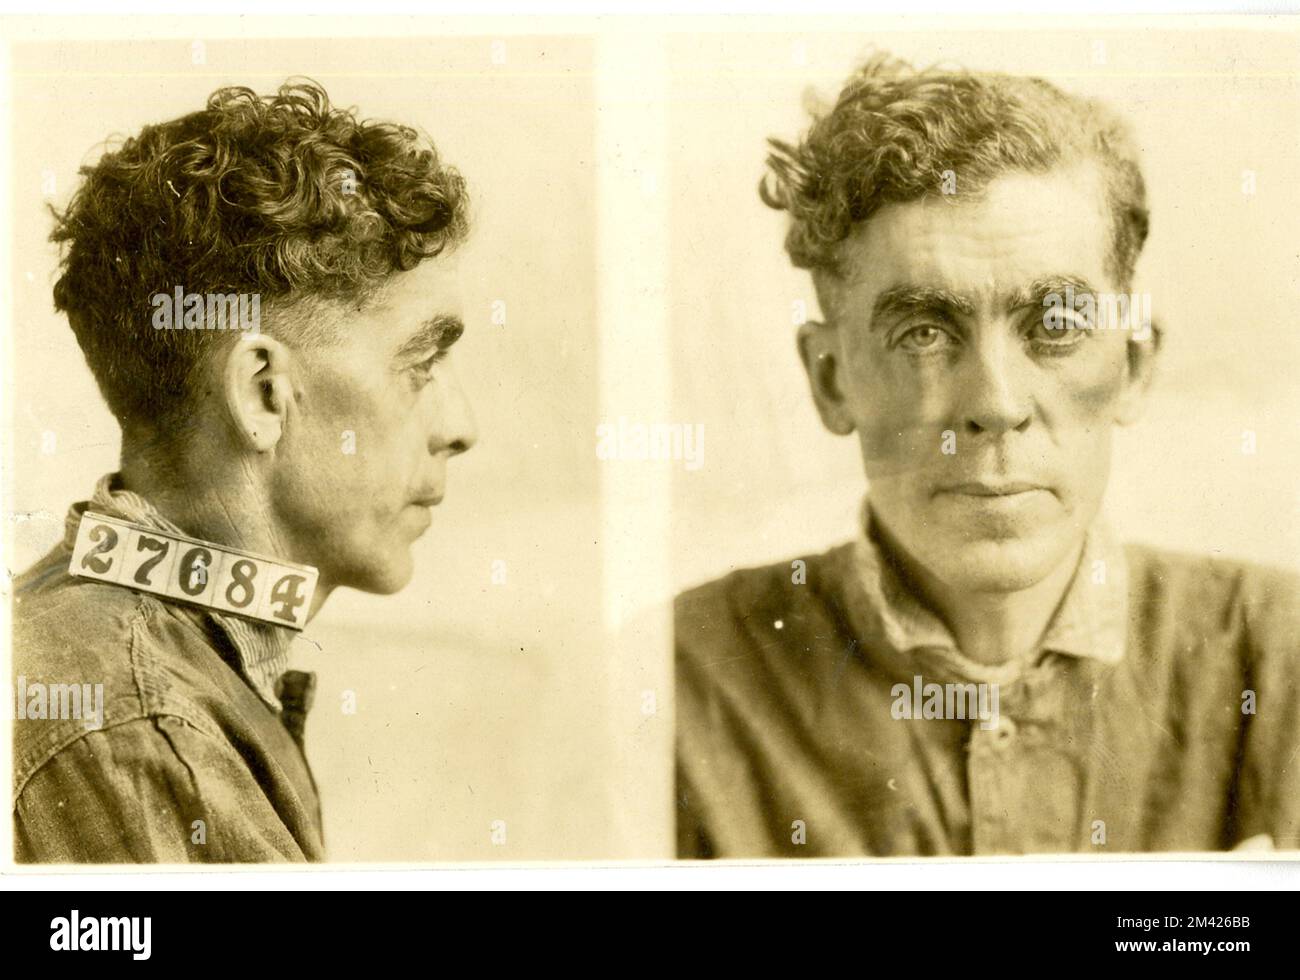 Photograph of Charles Larkin. This item is the prison photograph, also known as the 'mug shot,' of Leavenworth inmate Charles Larkin, register number 27684. Bureau of Prisons, Inmate case files. Stock Photo